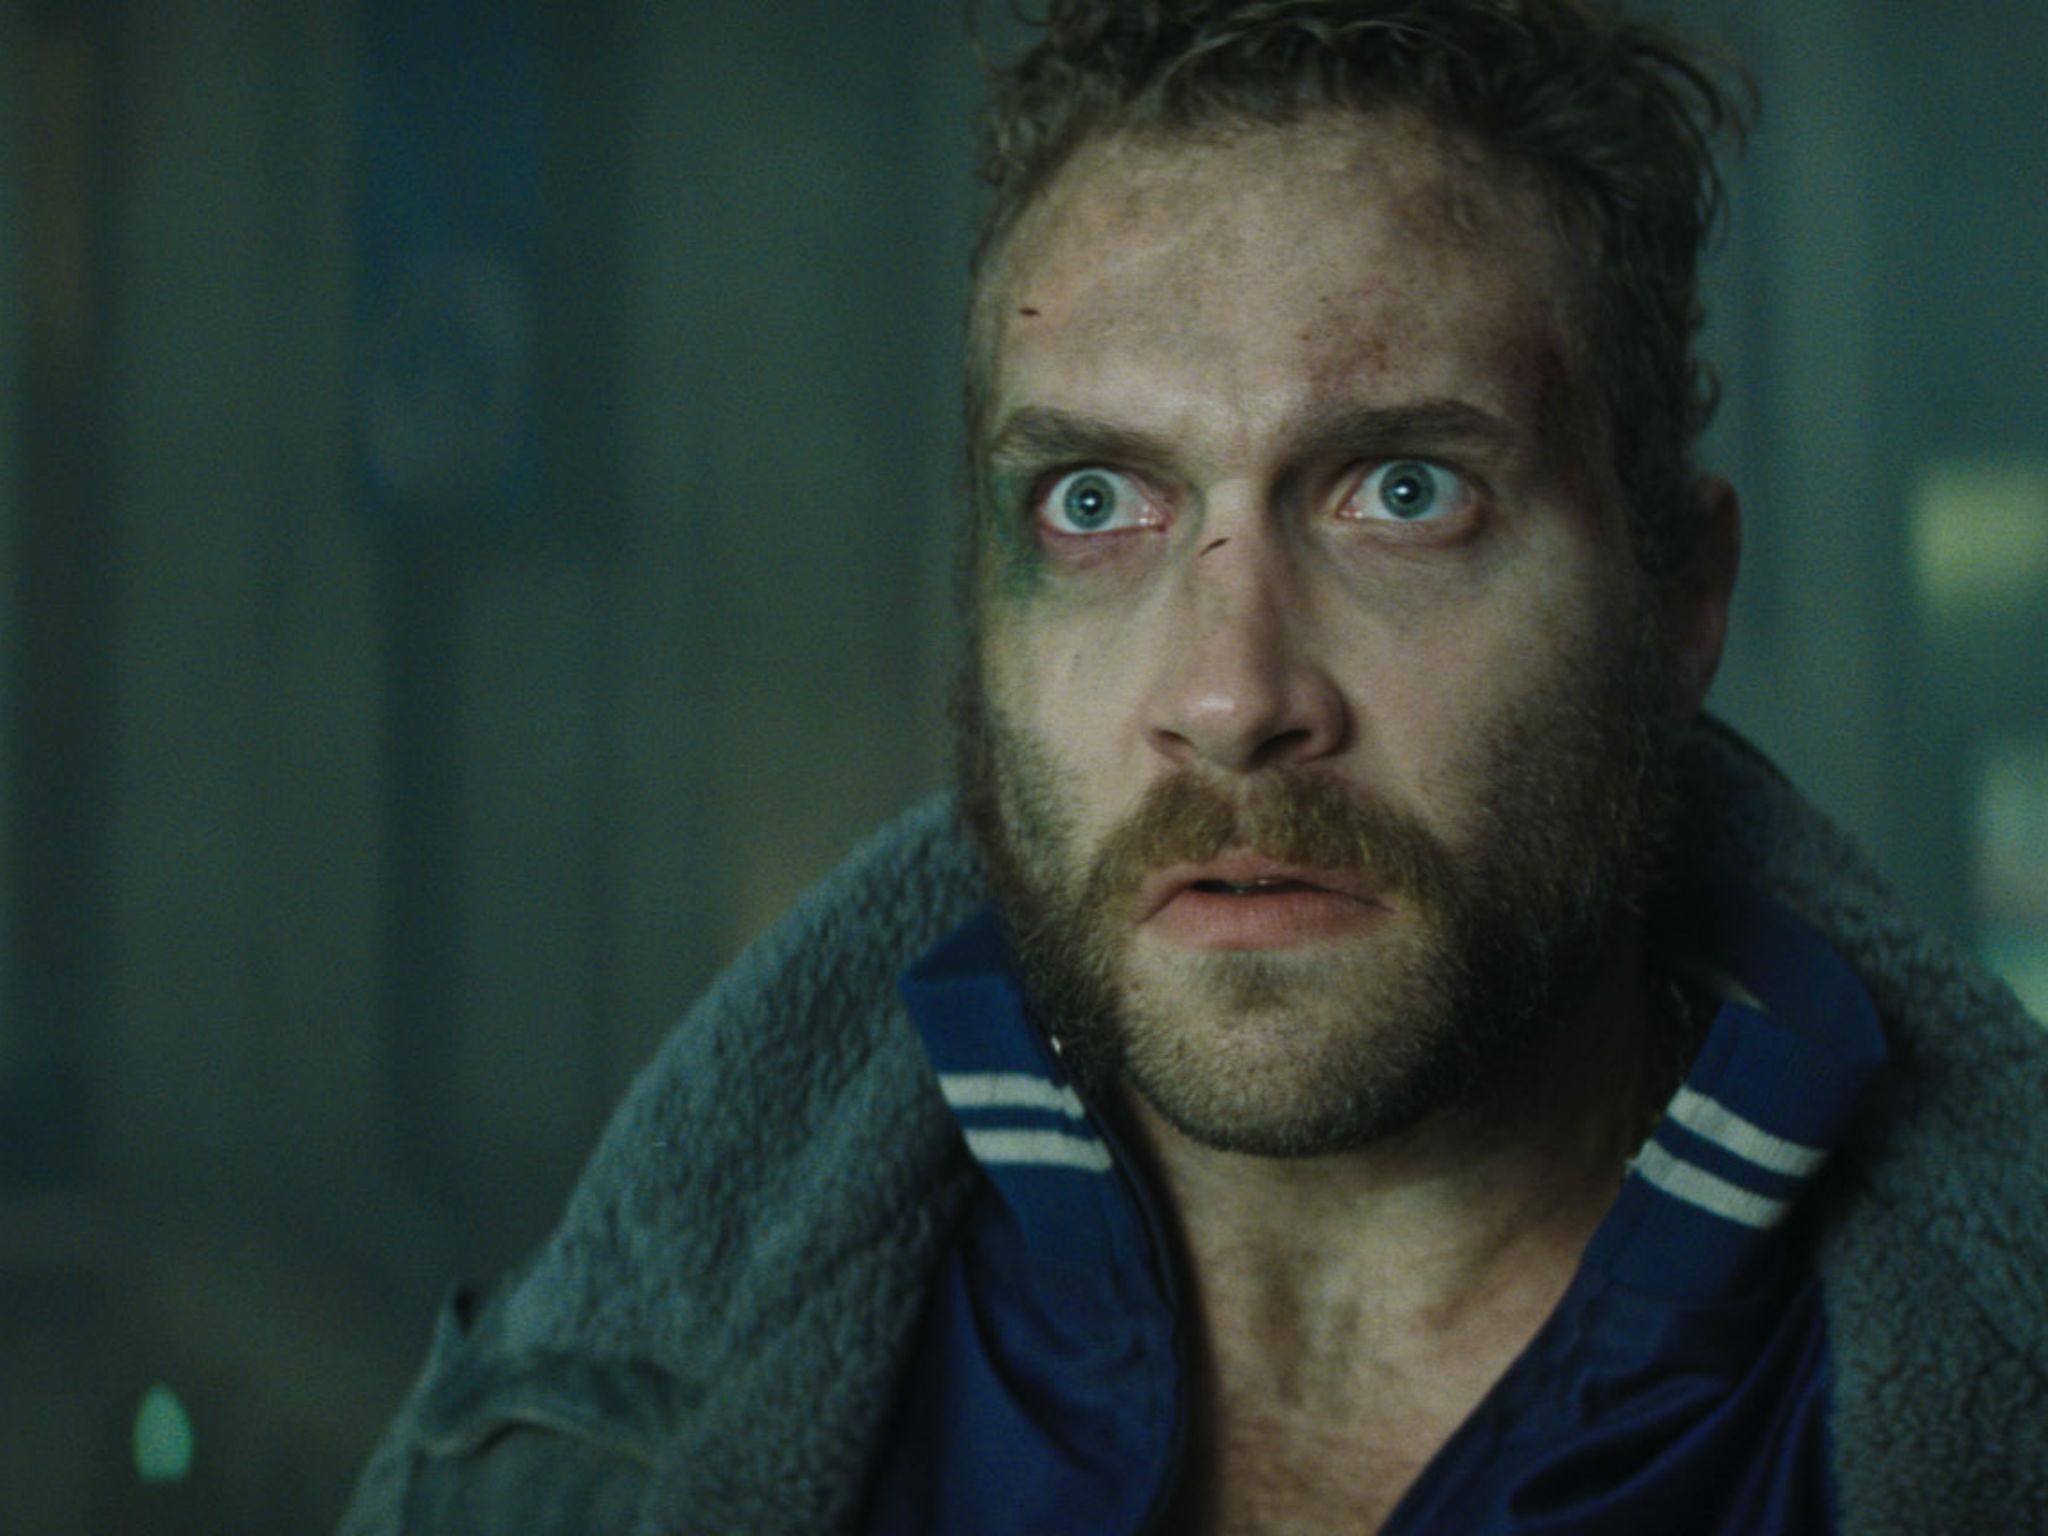 Jai Courtney as Captain Boomerang in Suicide Squad, released in UK cinemas on 5 August